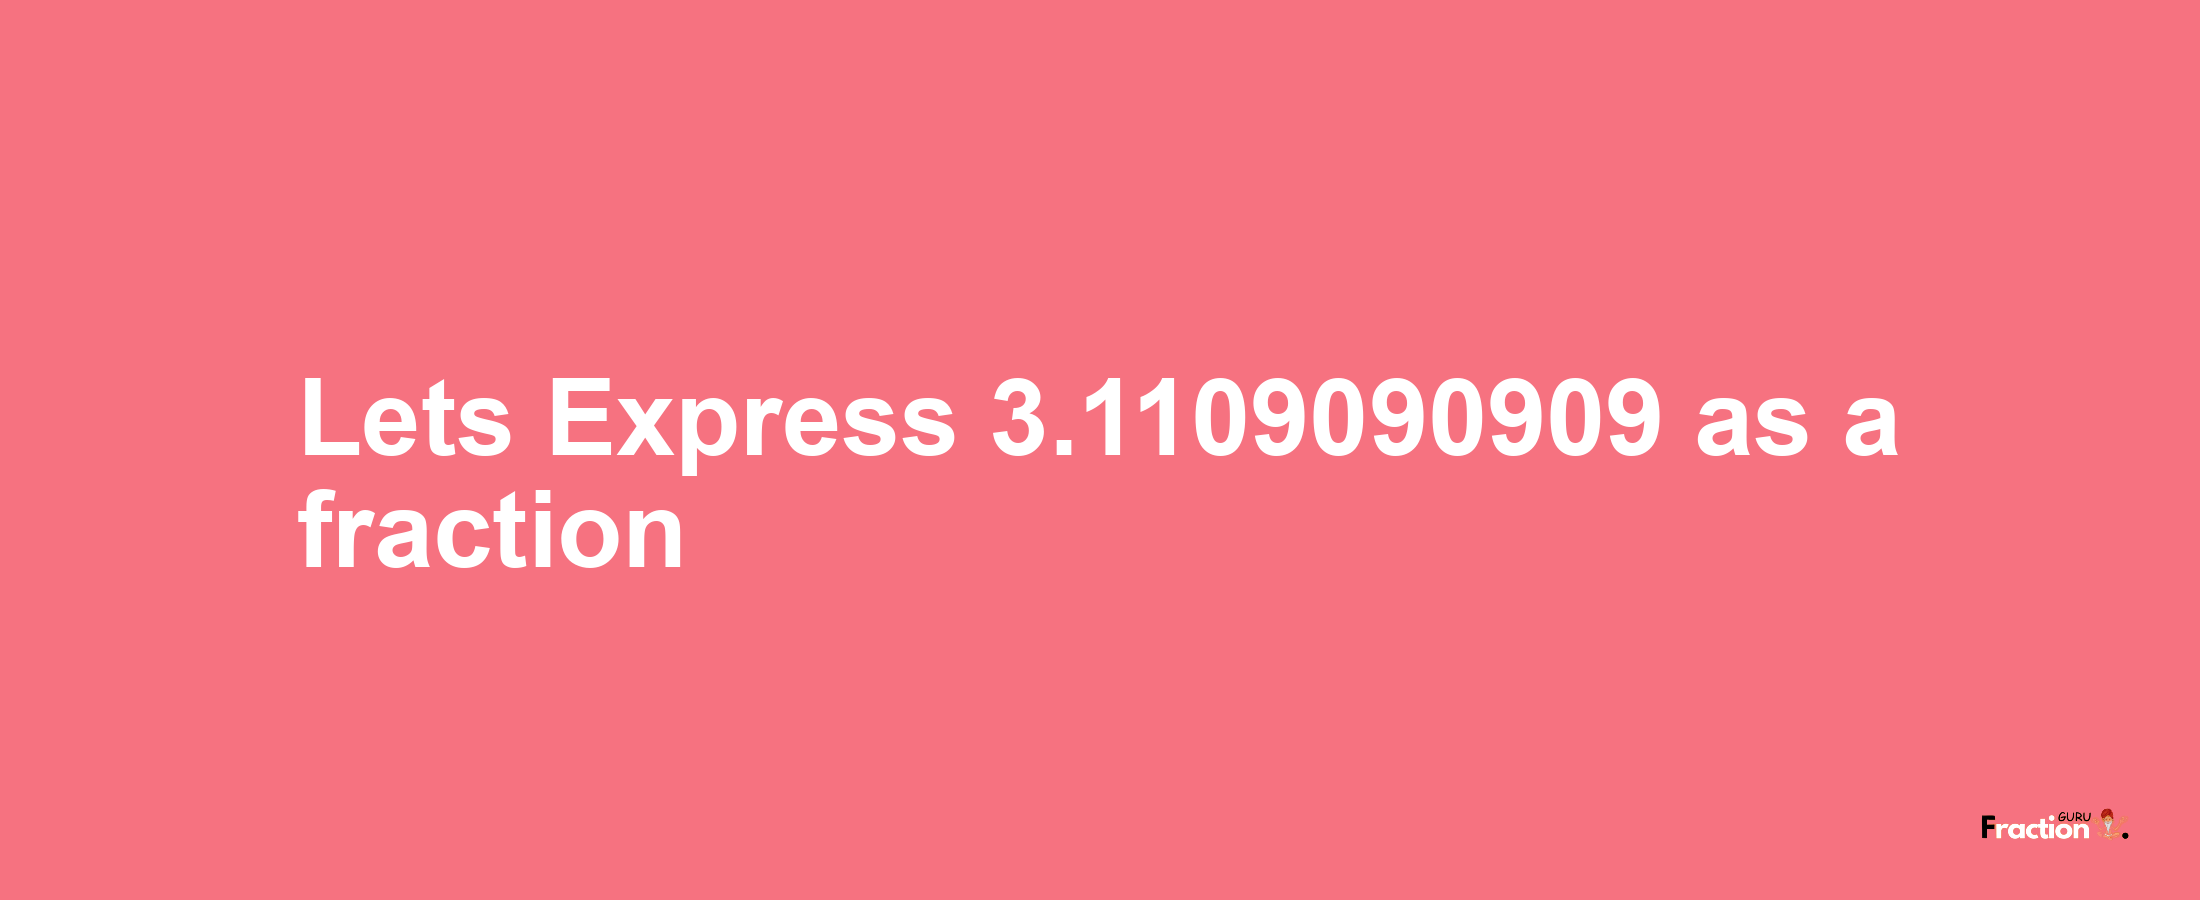 Lets Express 3.1109090909 as afraction